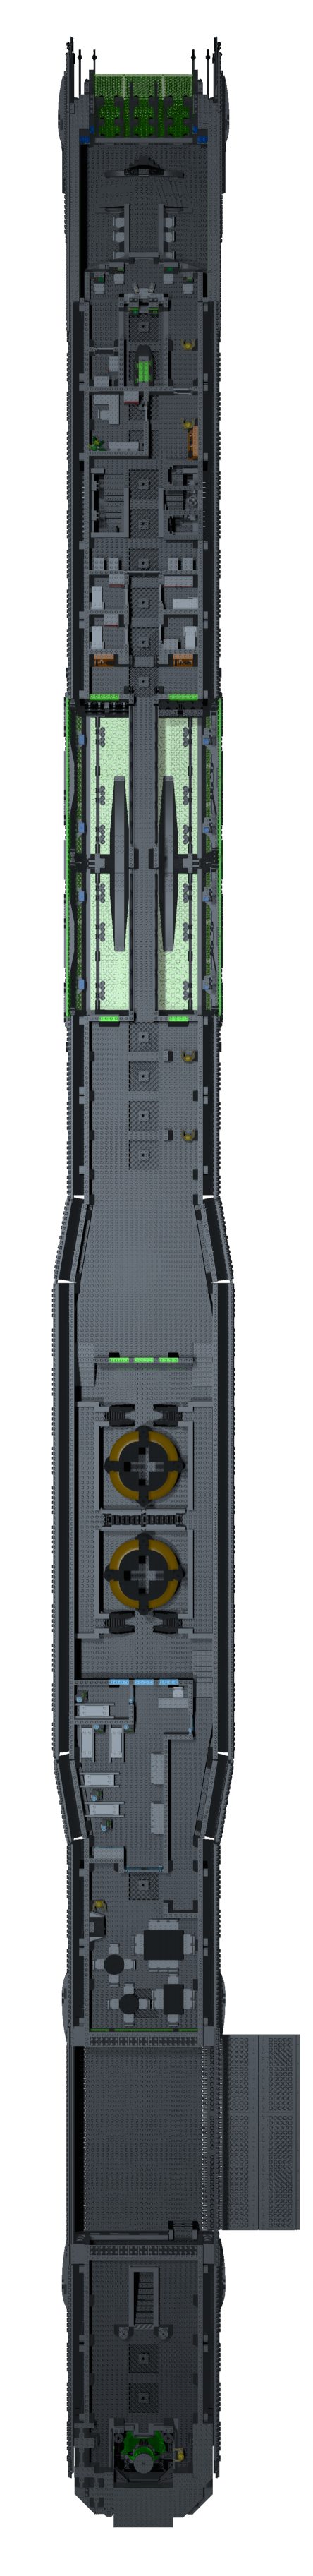 nostromo_1_detail1_cropped.png